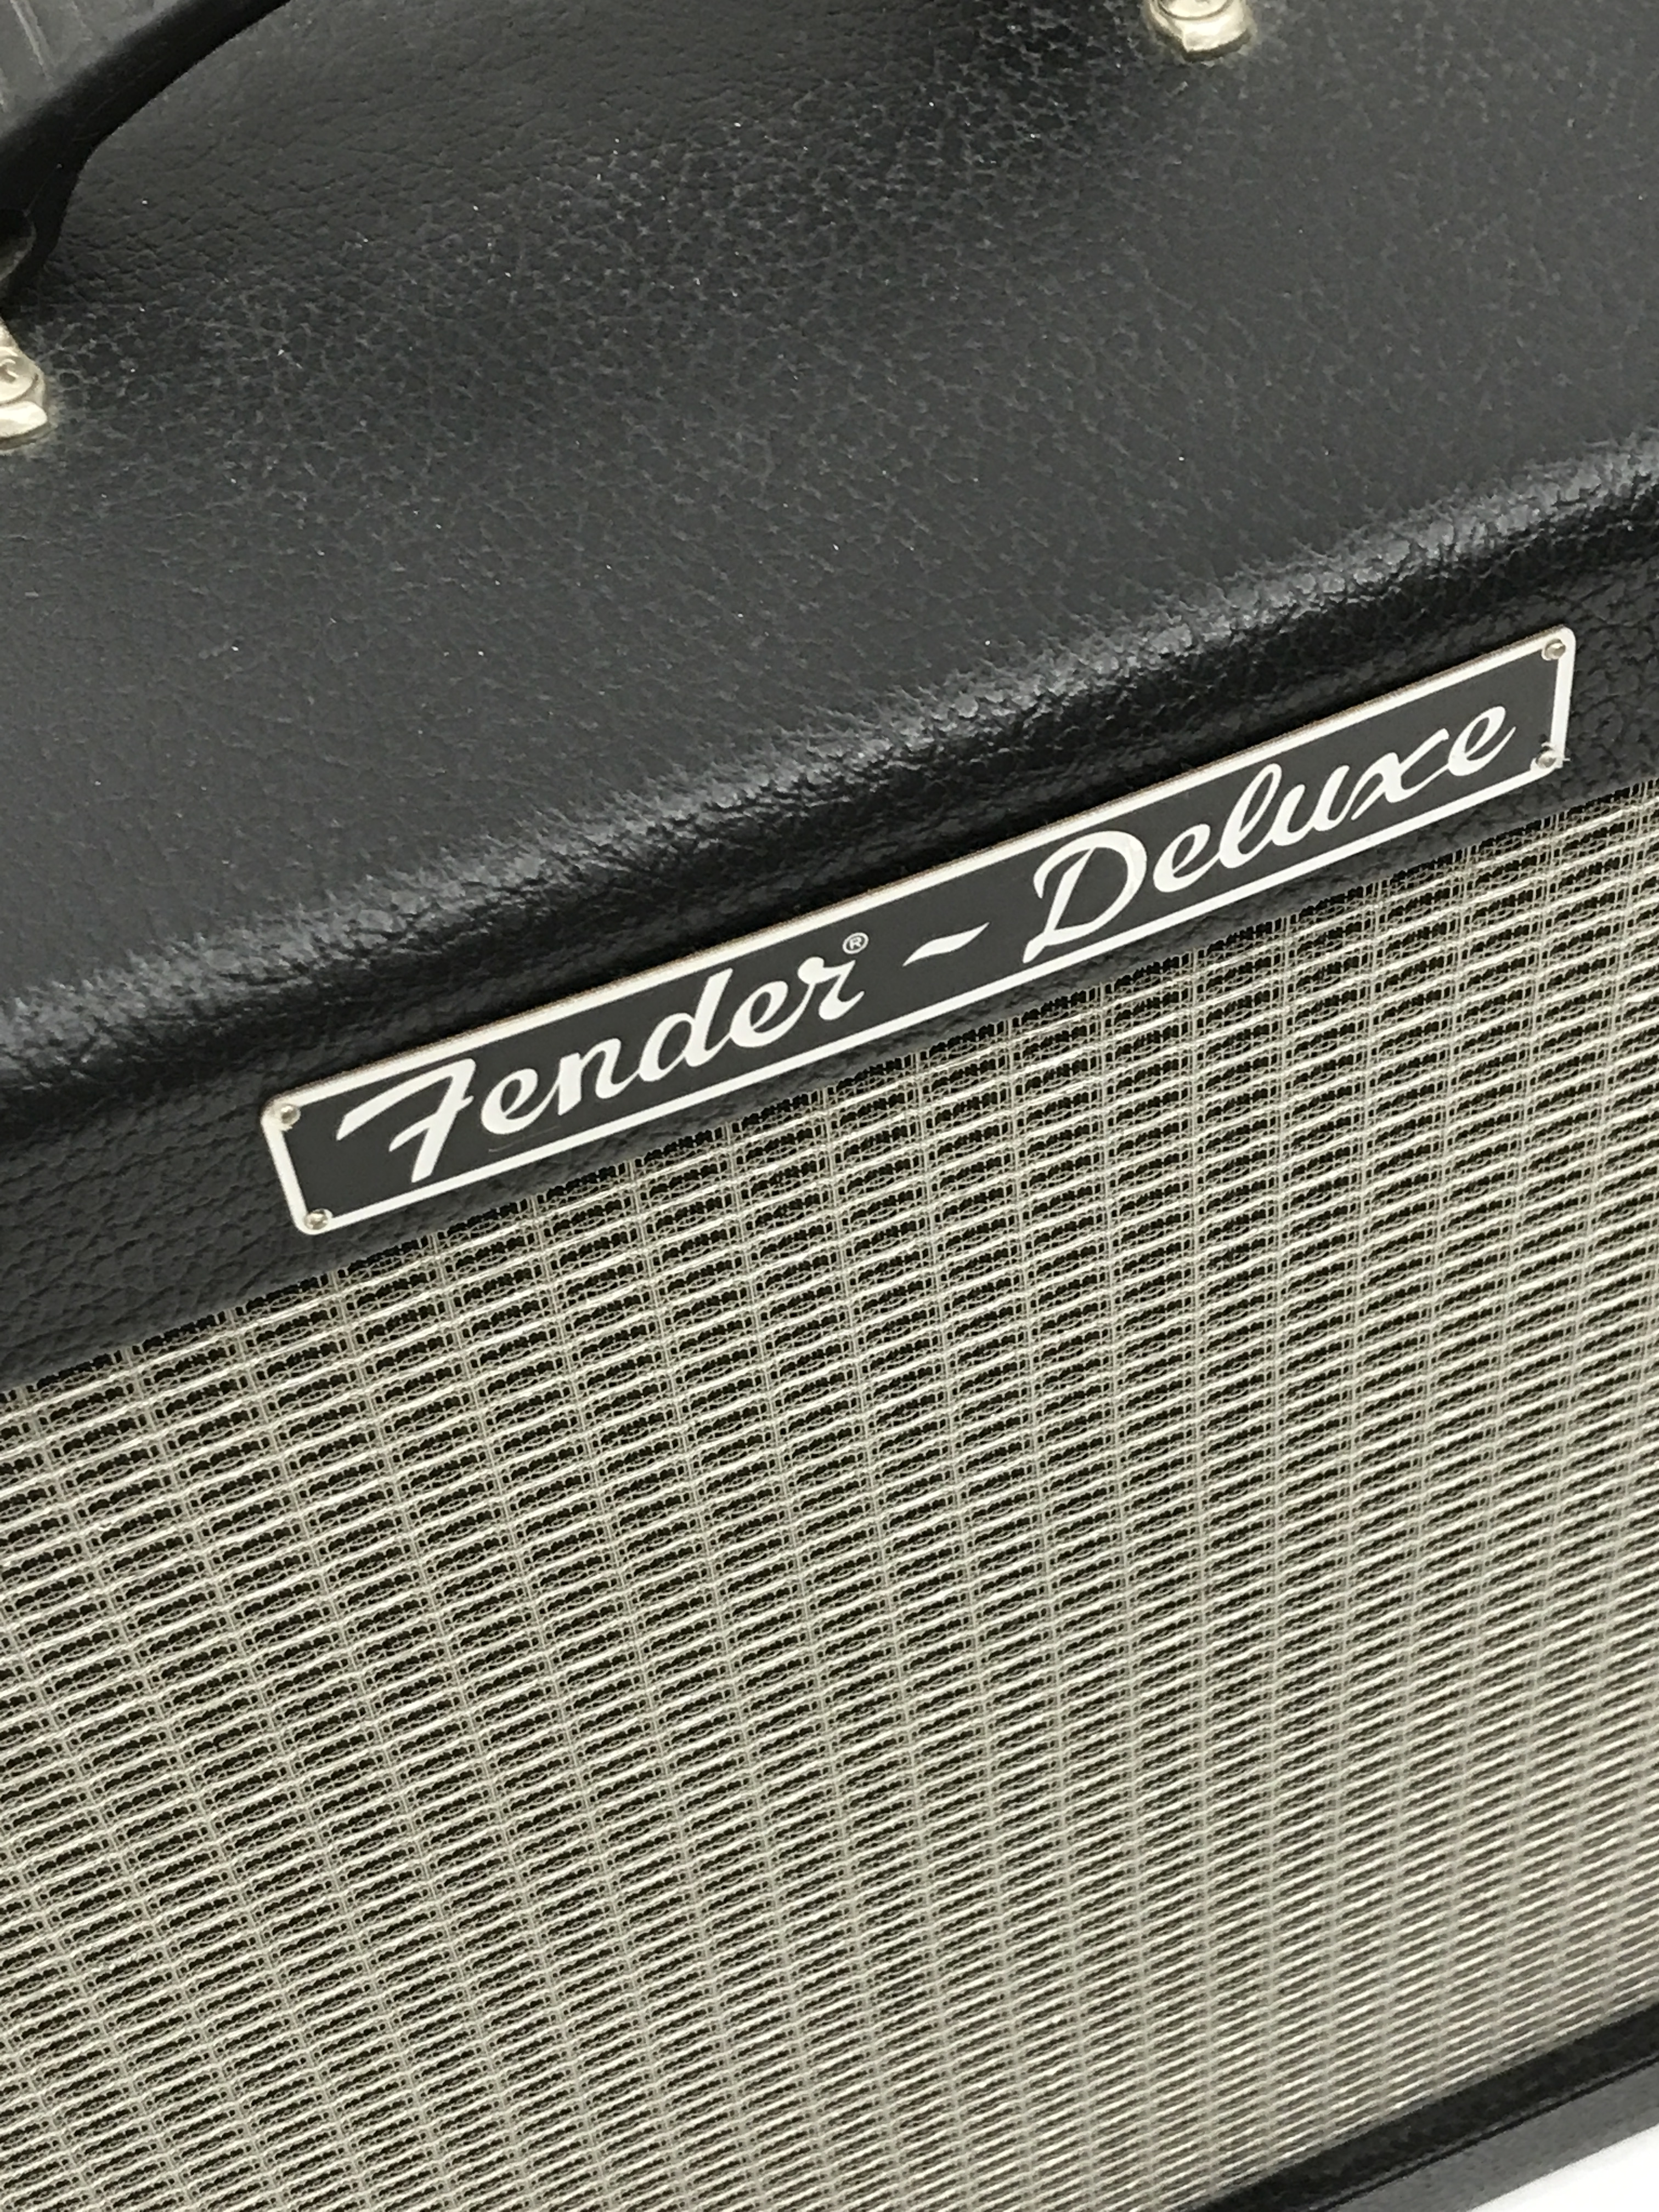 Fender Hot Rod Deluxe guitar amplifier Type PR-246, serial no. B-006445, made in U.S.A. - Image 4 of 4